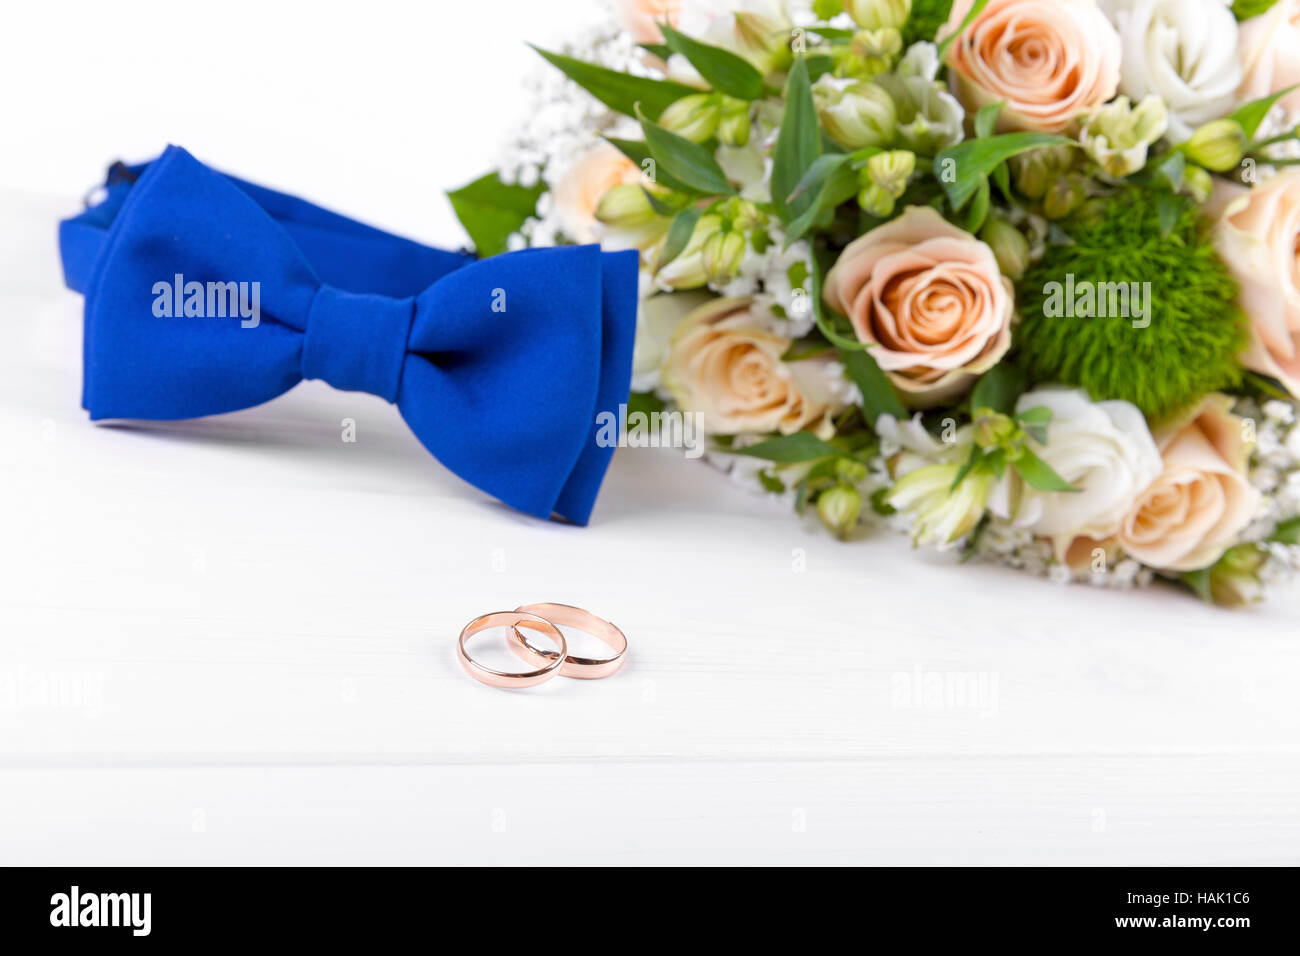 wedding rings and accessories on white wooden table Stock Photo